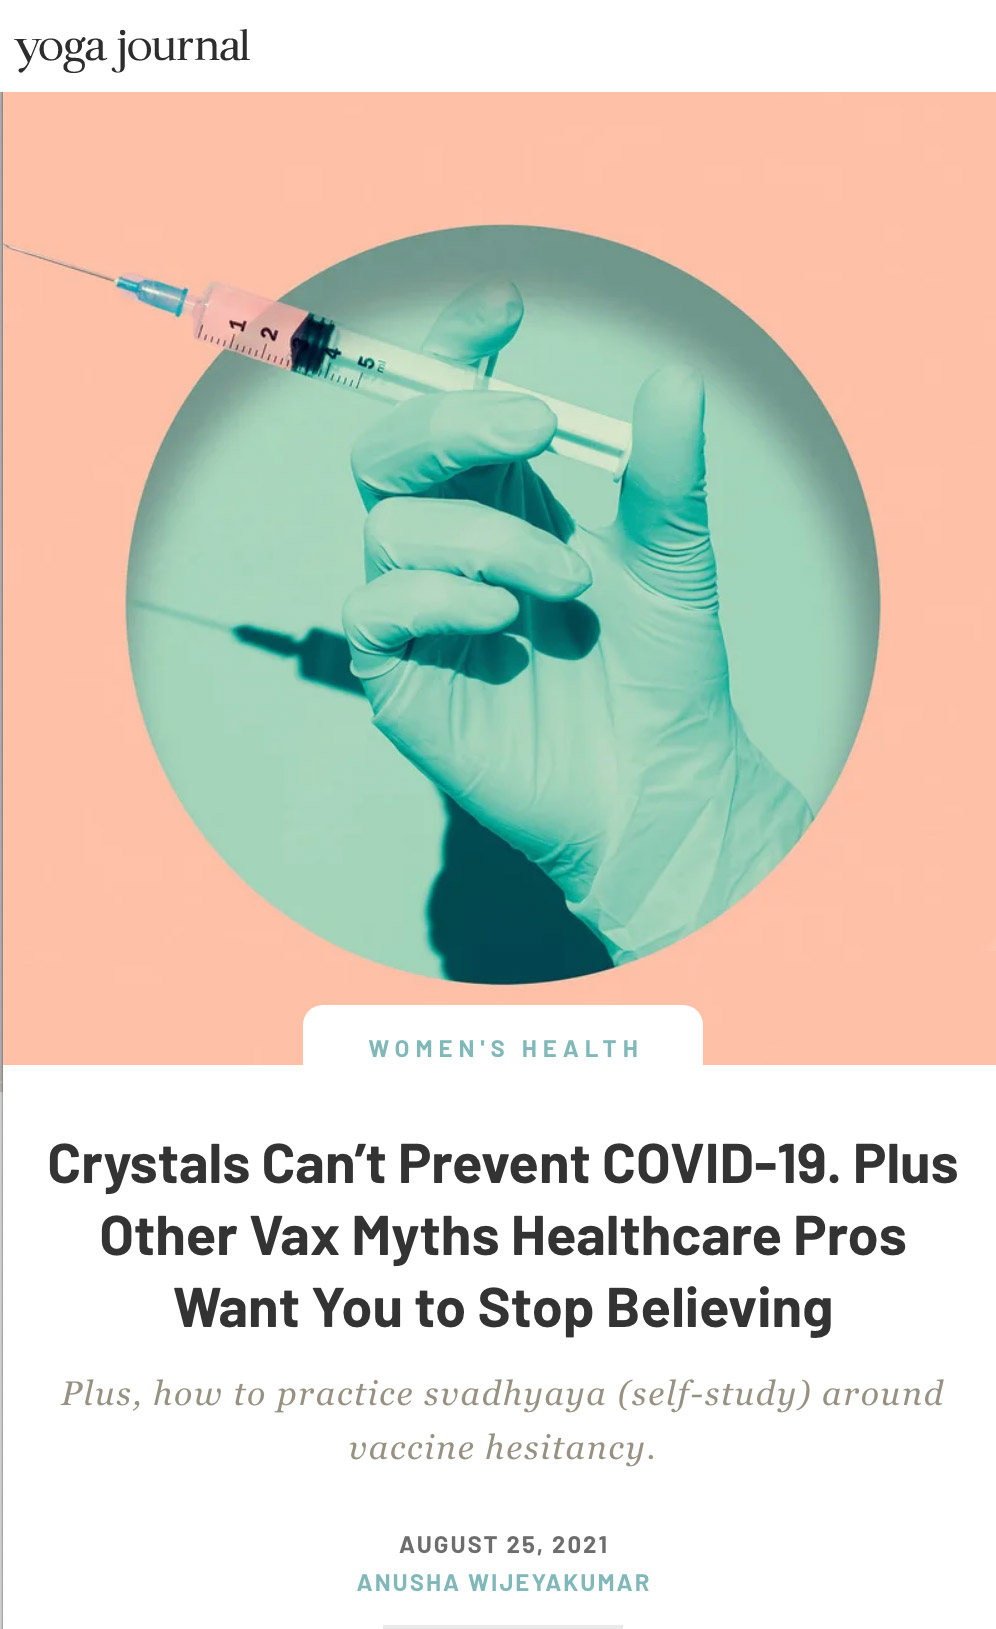 Crystals Can’t Prevent COVID-19. Plus Other Vax Myths Healthcare Pros Want You to Stop Believing